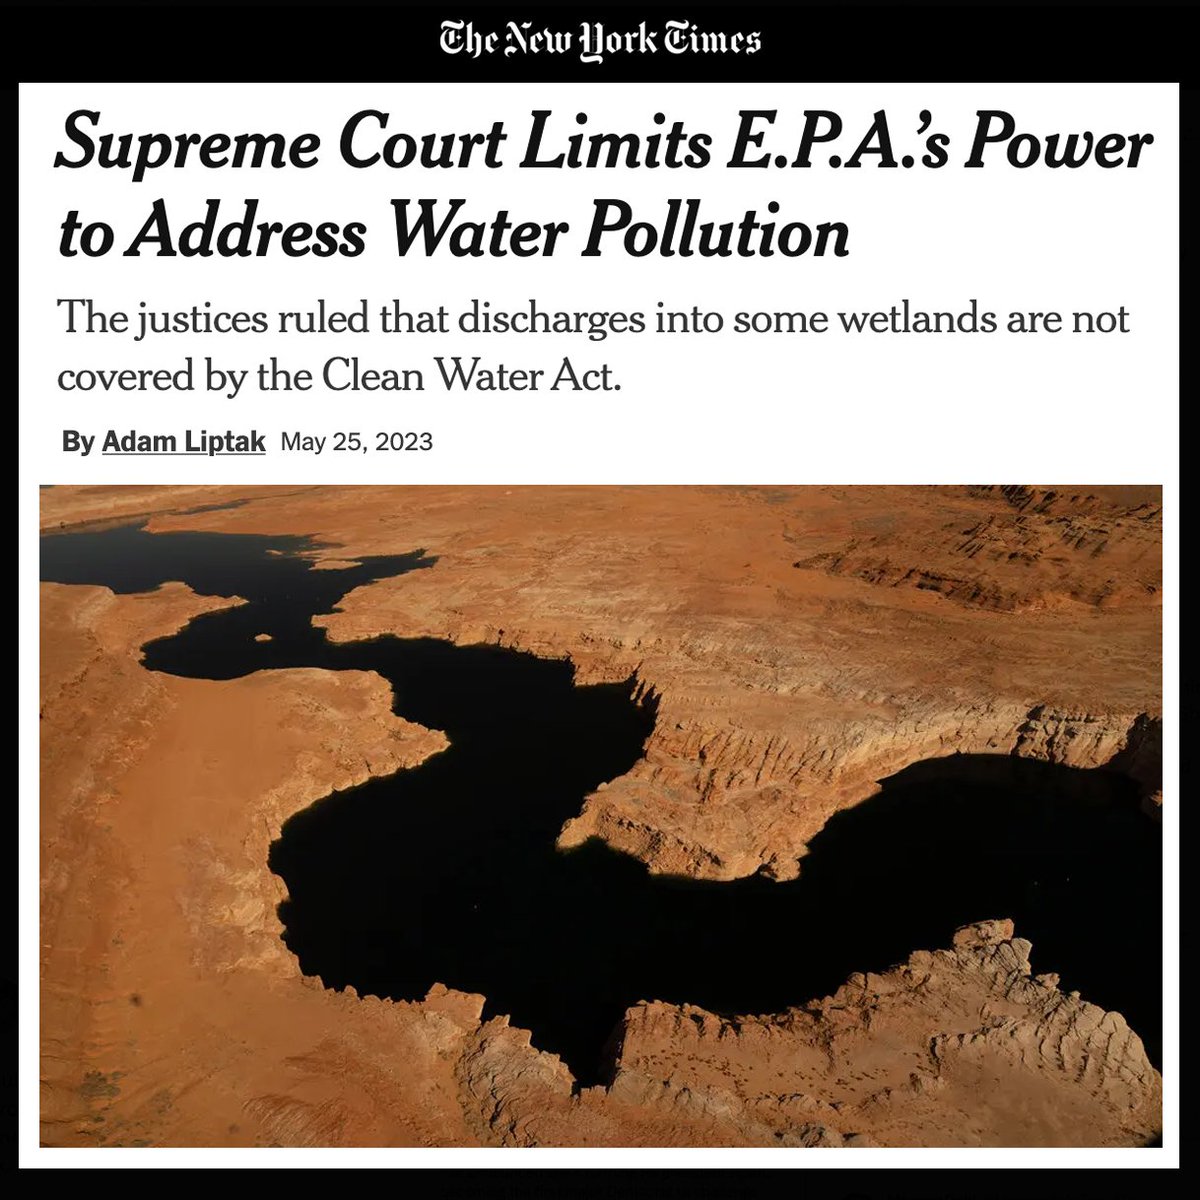 BREAKING: As the world faces climate catastrophe, our pro-industry Supreme Court ruled today that most of the nation's wetlands cannot be regulated by the government. 

Another shameful triumph of corporate power.
nytimes.com/2023/05/25/us/…